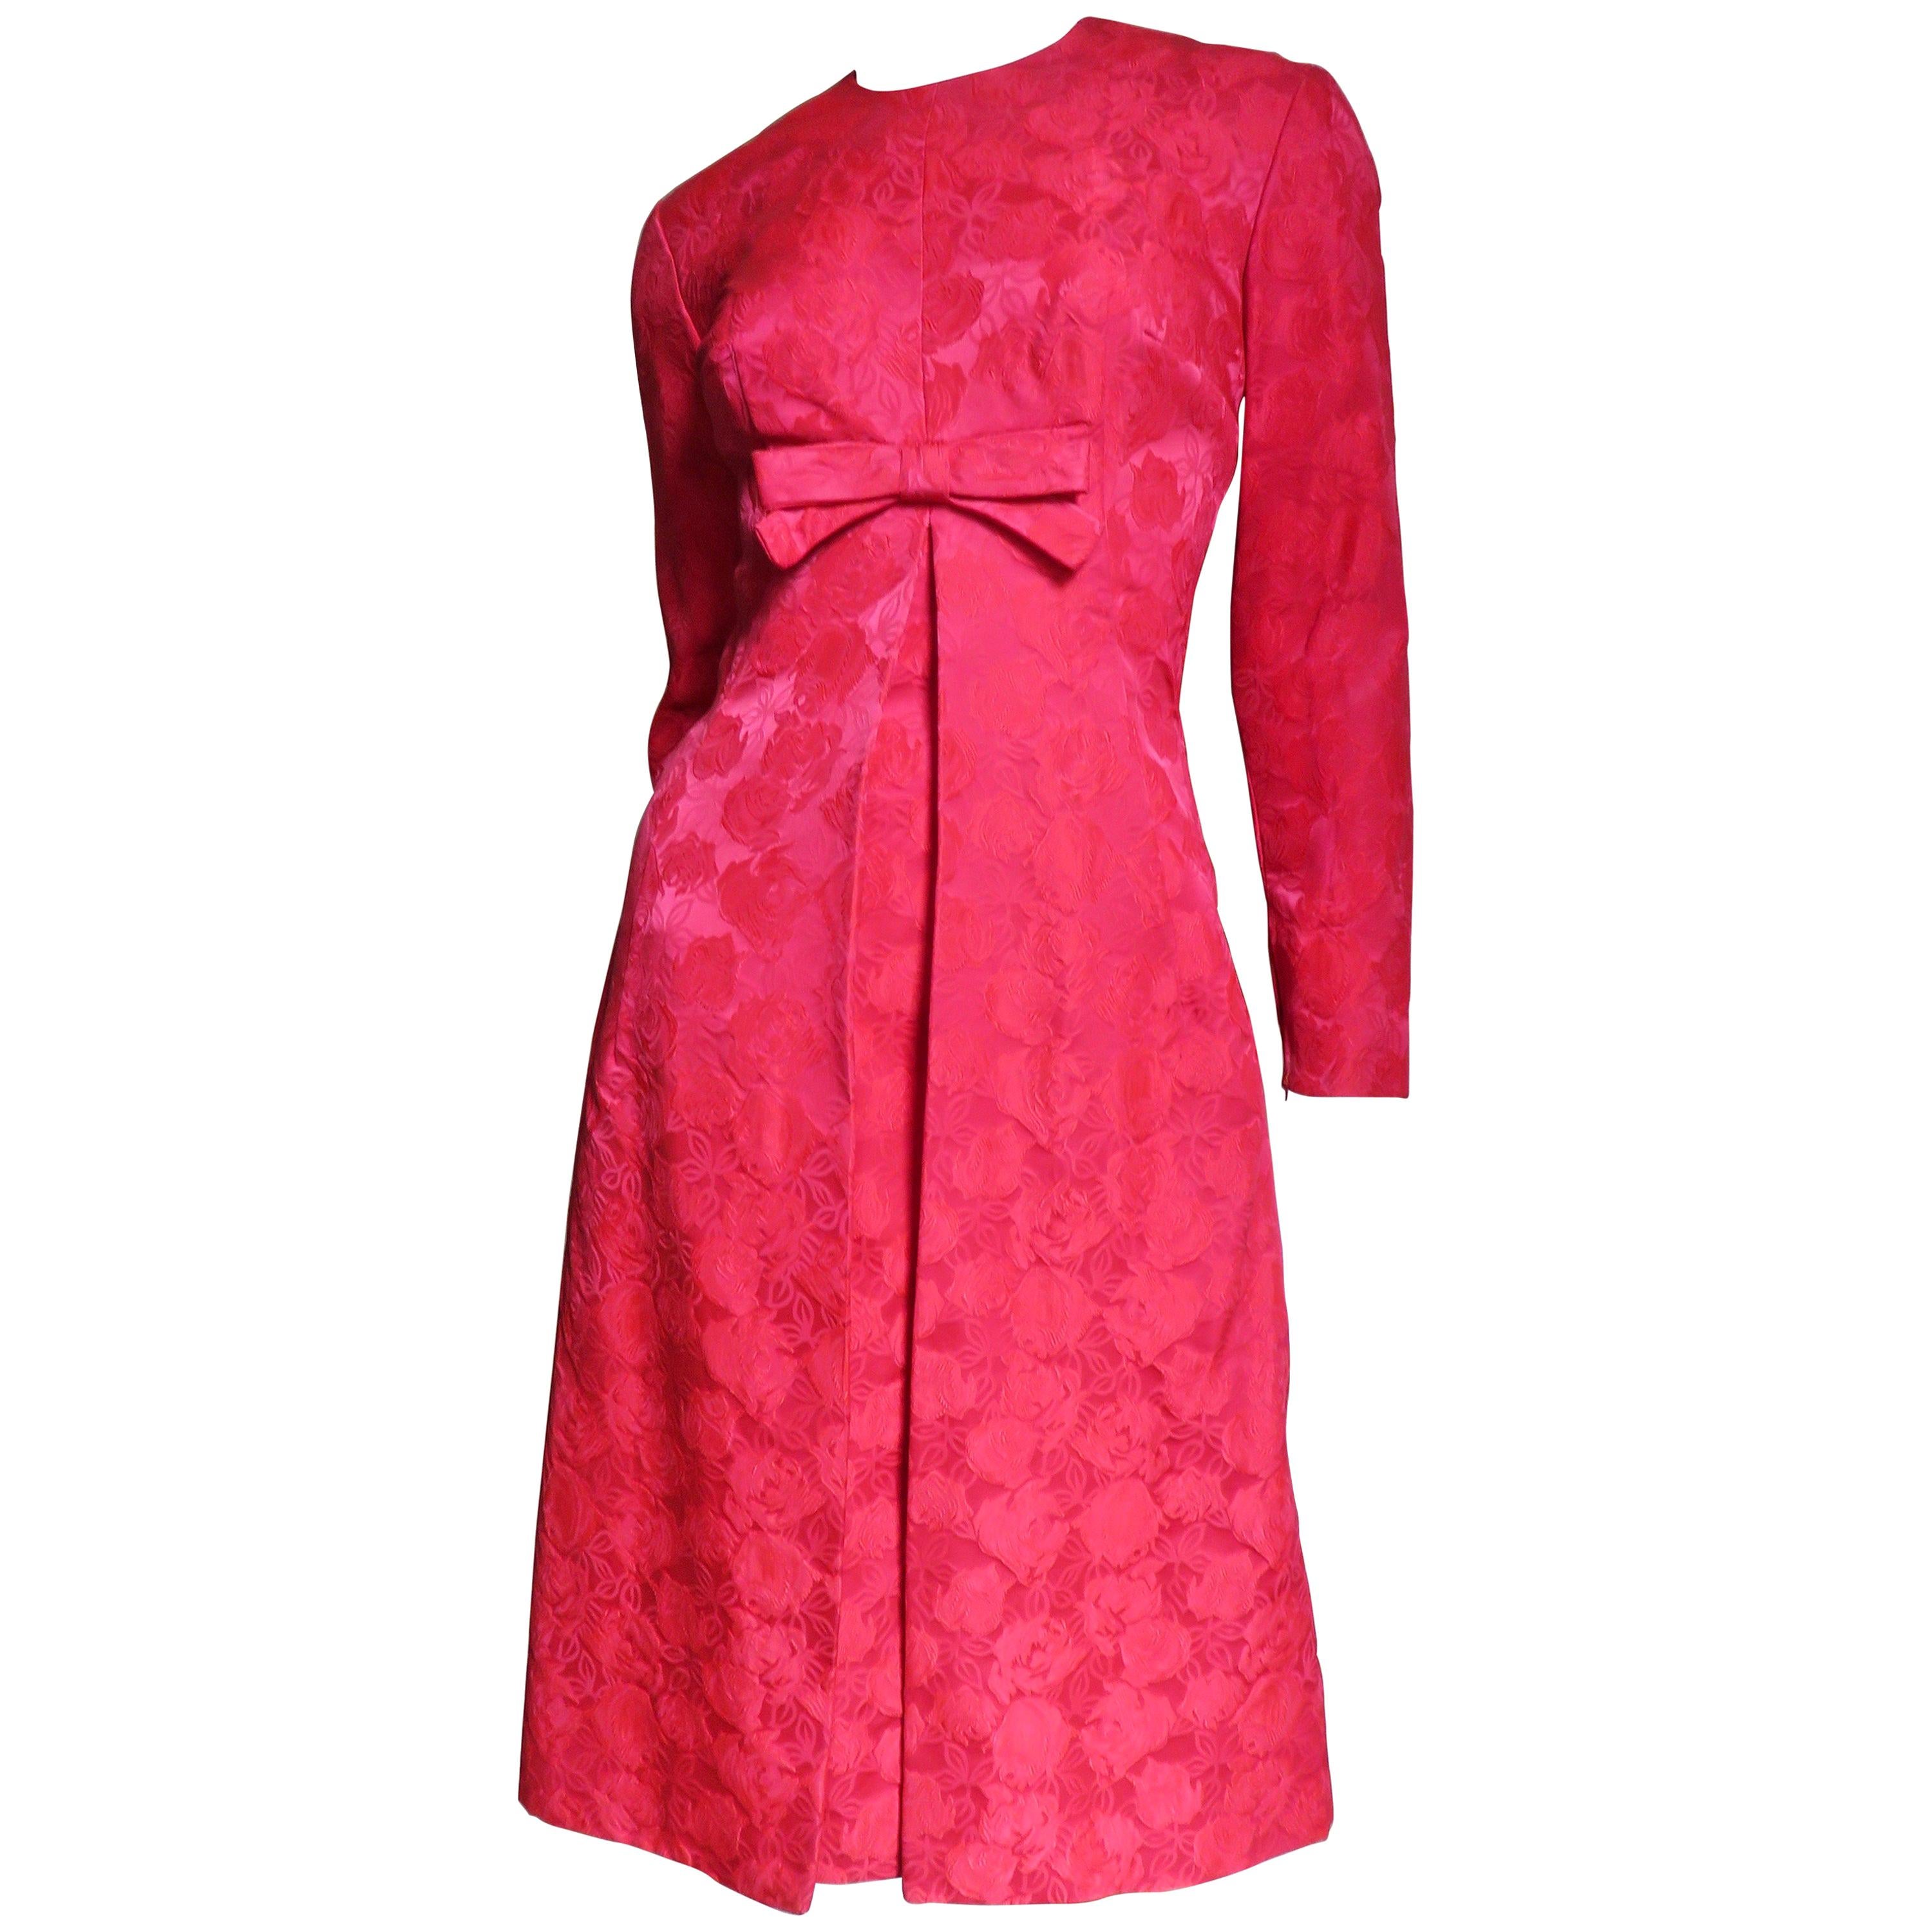 Suzy Perette New Damask Dress and Overdress 1950s